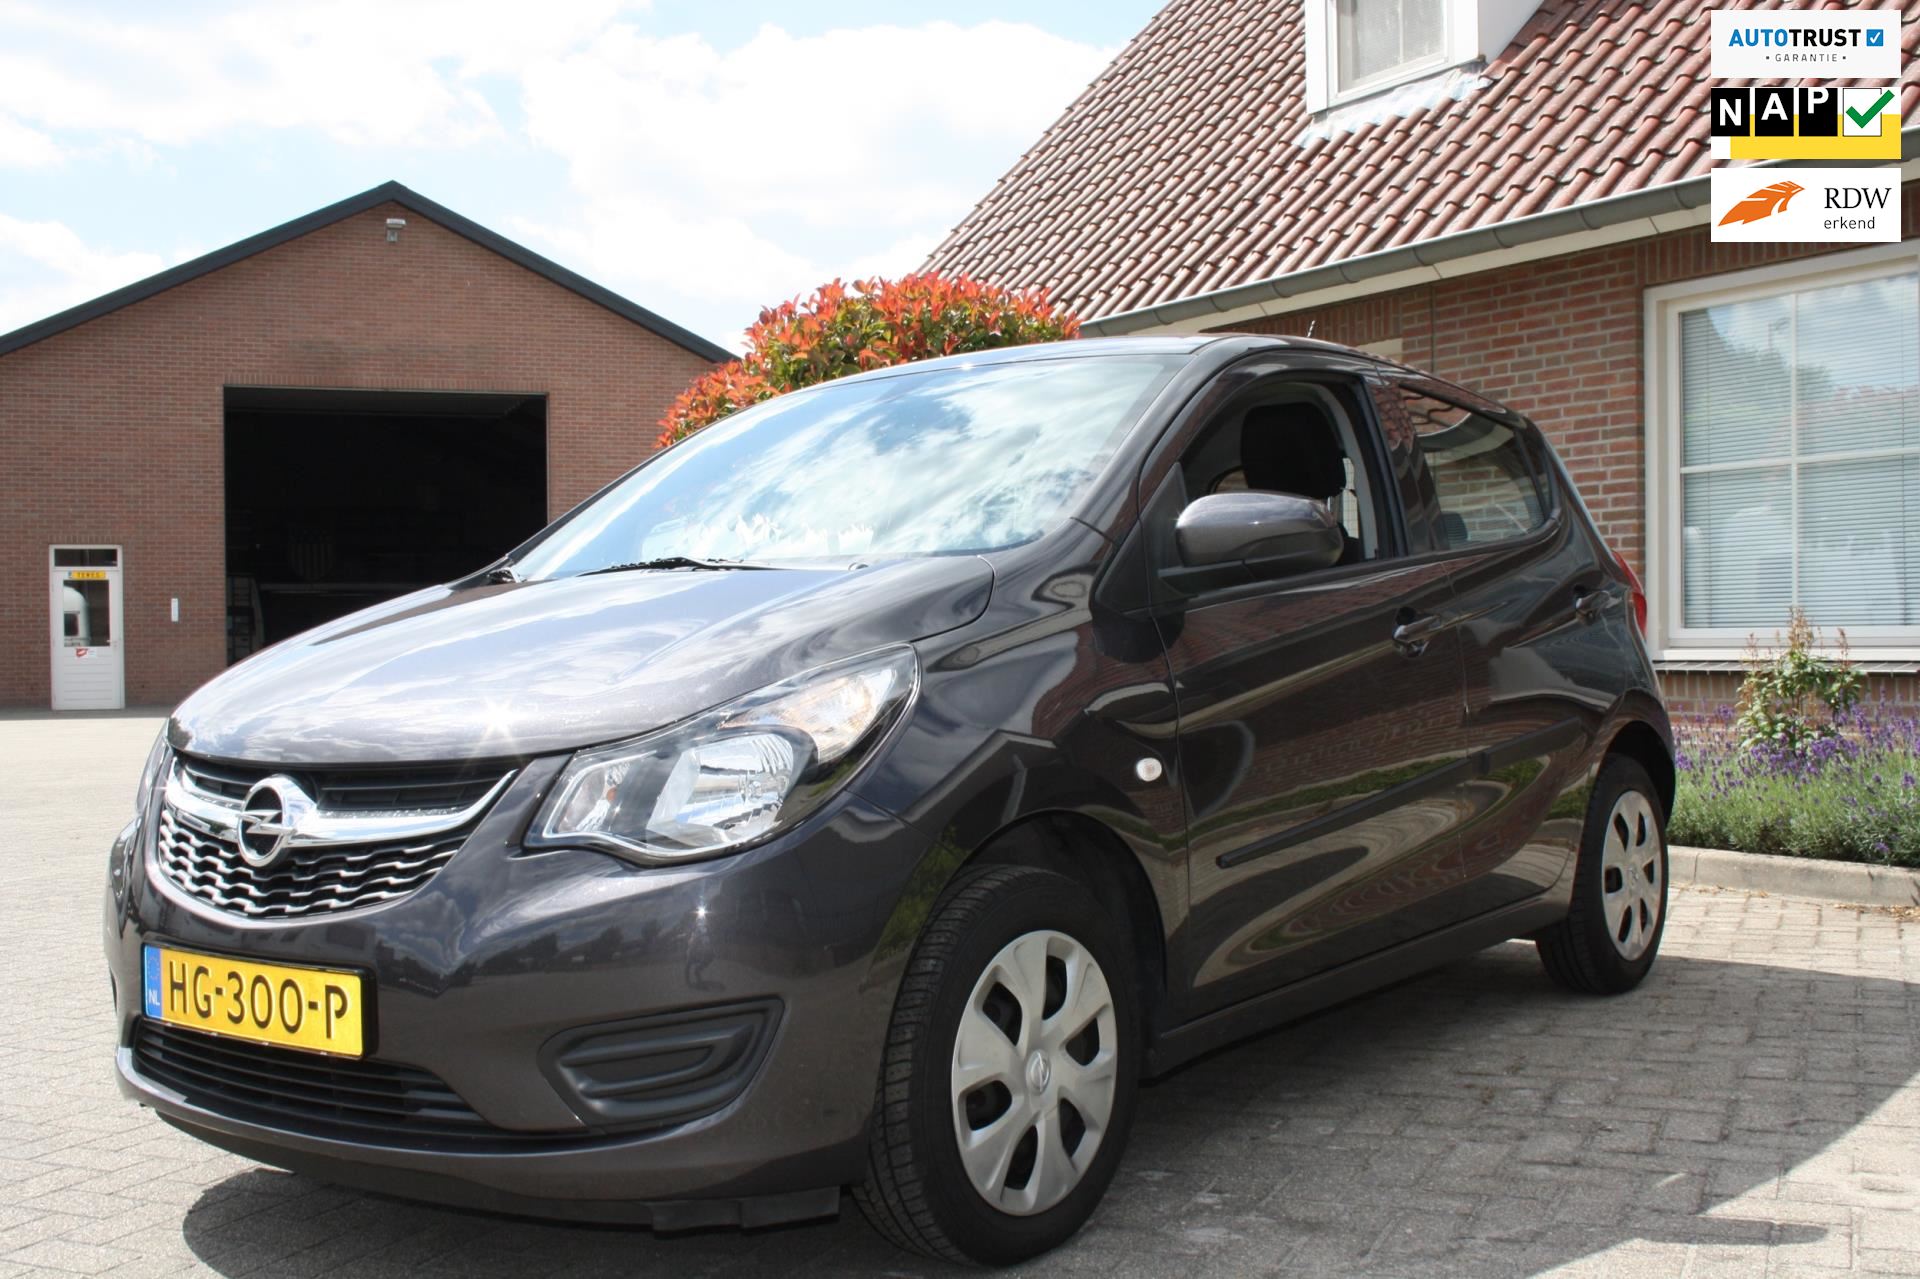 Opel KARL occasion - Auto Tewes